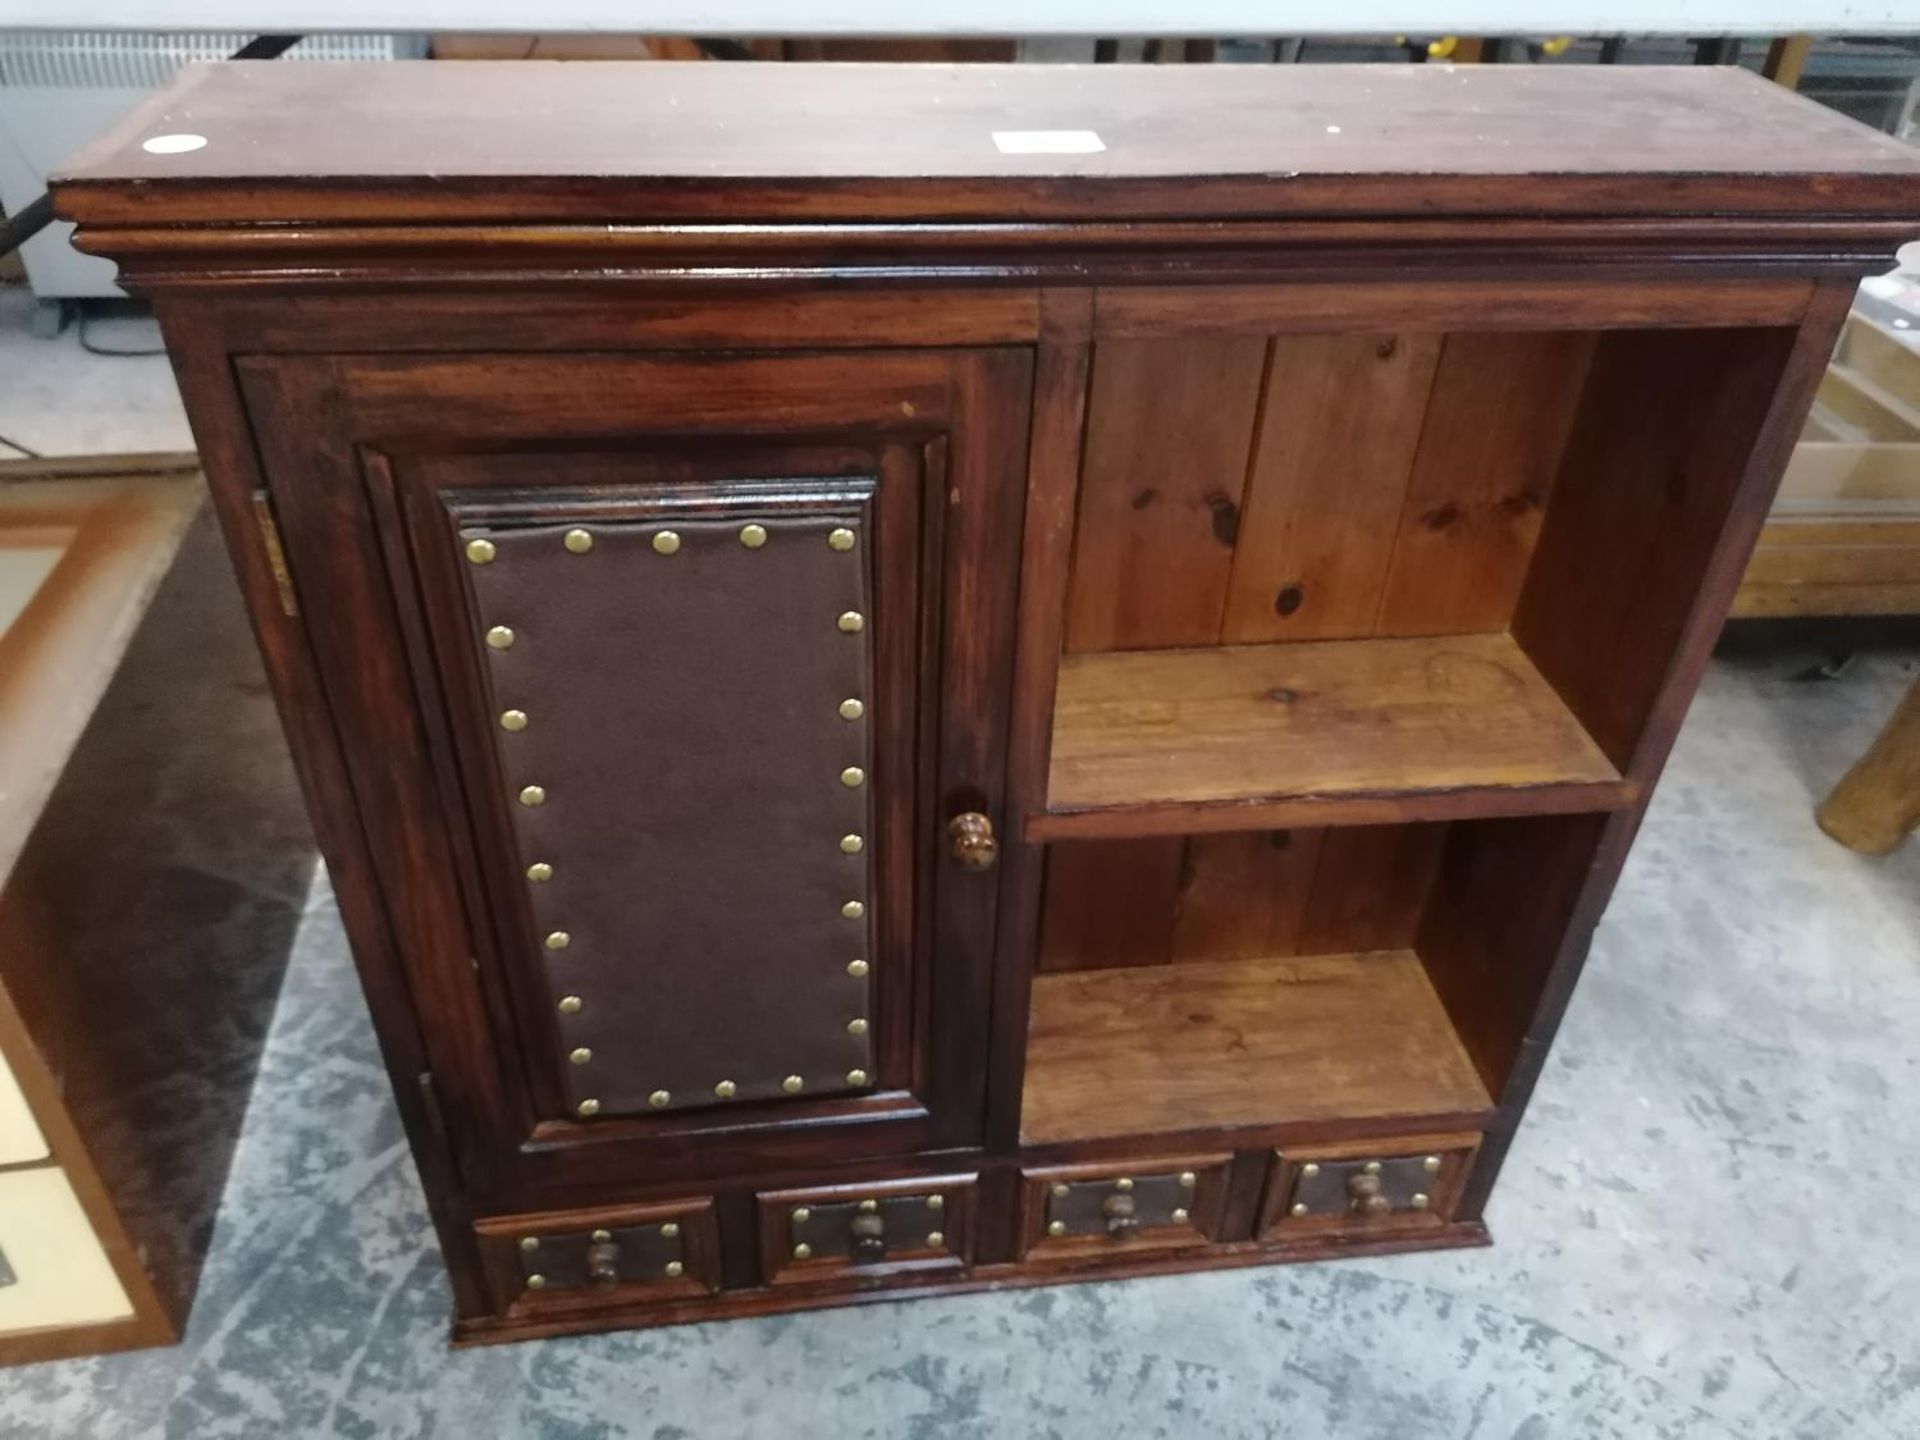 A VINTAGE STYLE HARDWOOD CABINET WITH SINGLE DOOR AND LOWER FOUR DRAWERS